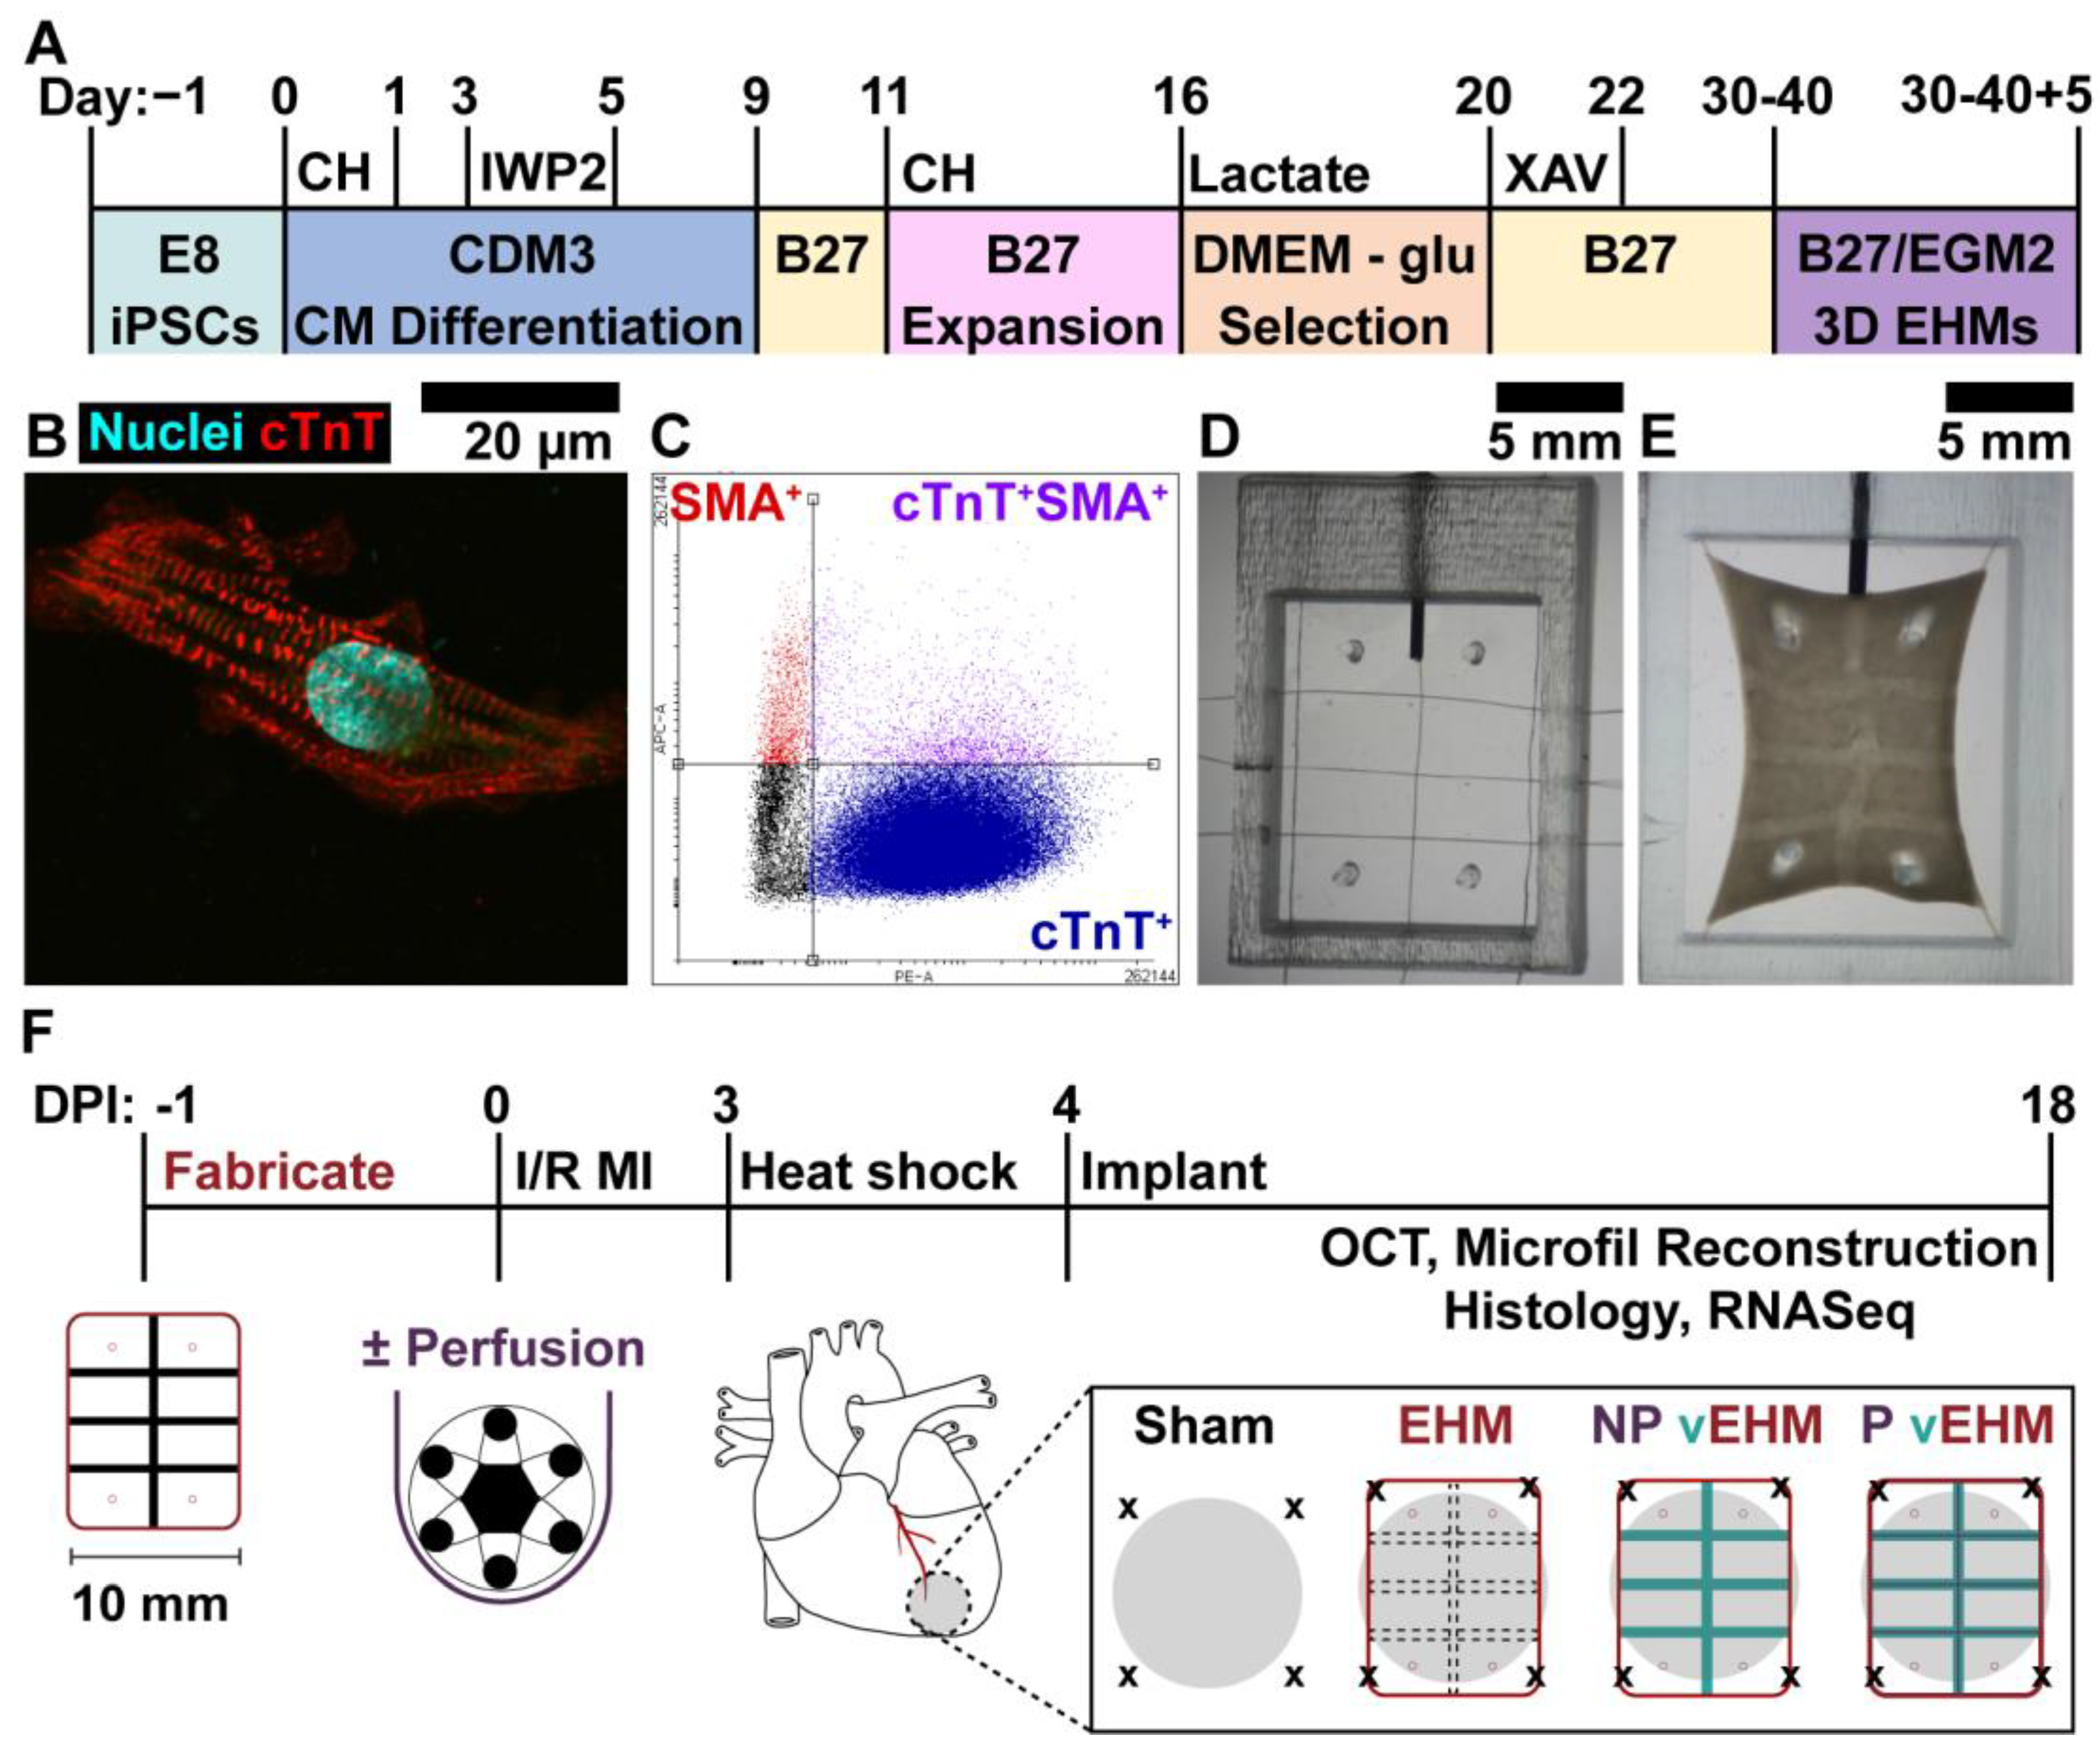 Cells Free Full-Text Patterned Arteriole-Scale Vessels Enhance Engraftment, Perfusion, and Vessel Branching Hierarchy of Engineered Human Myocardium for Heart Regeneration